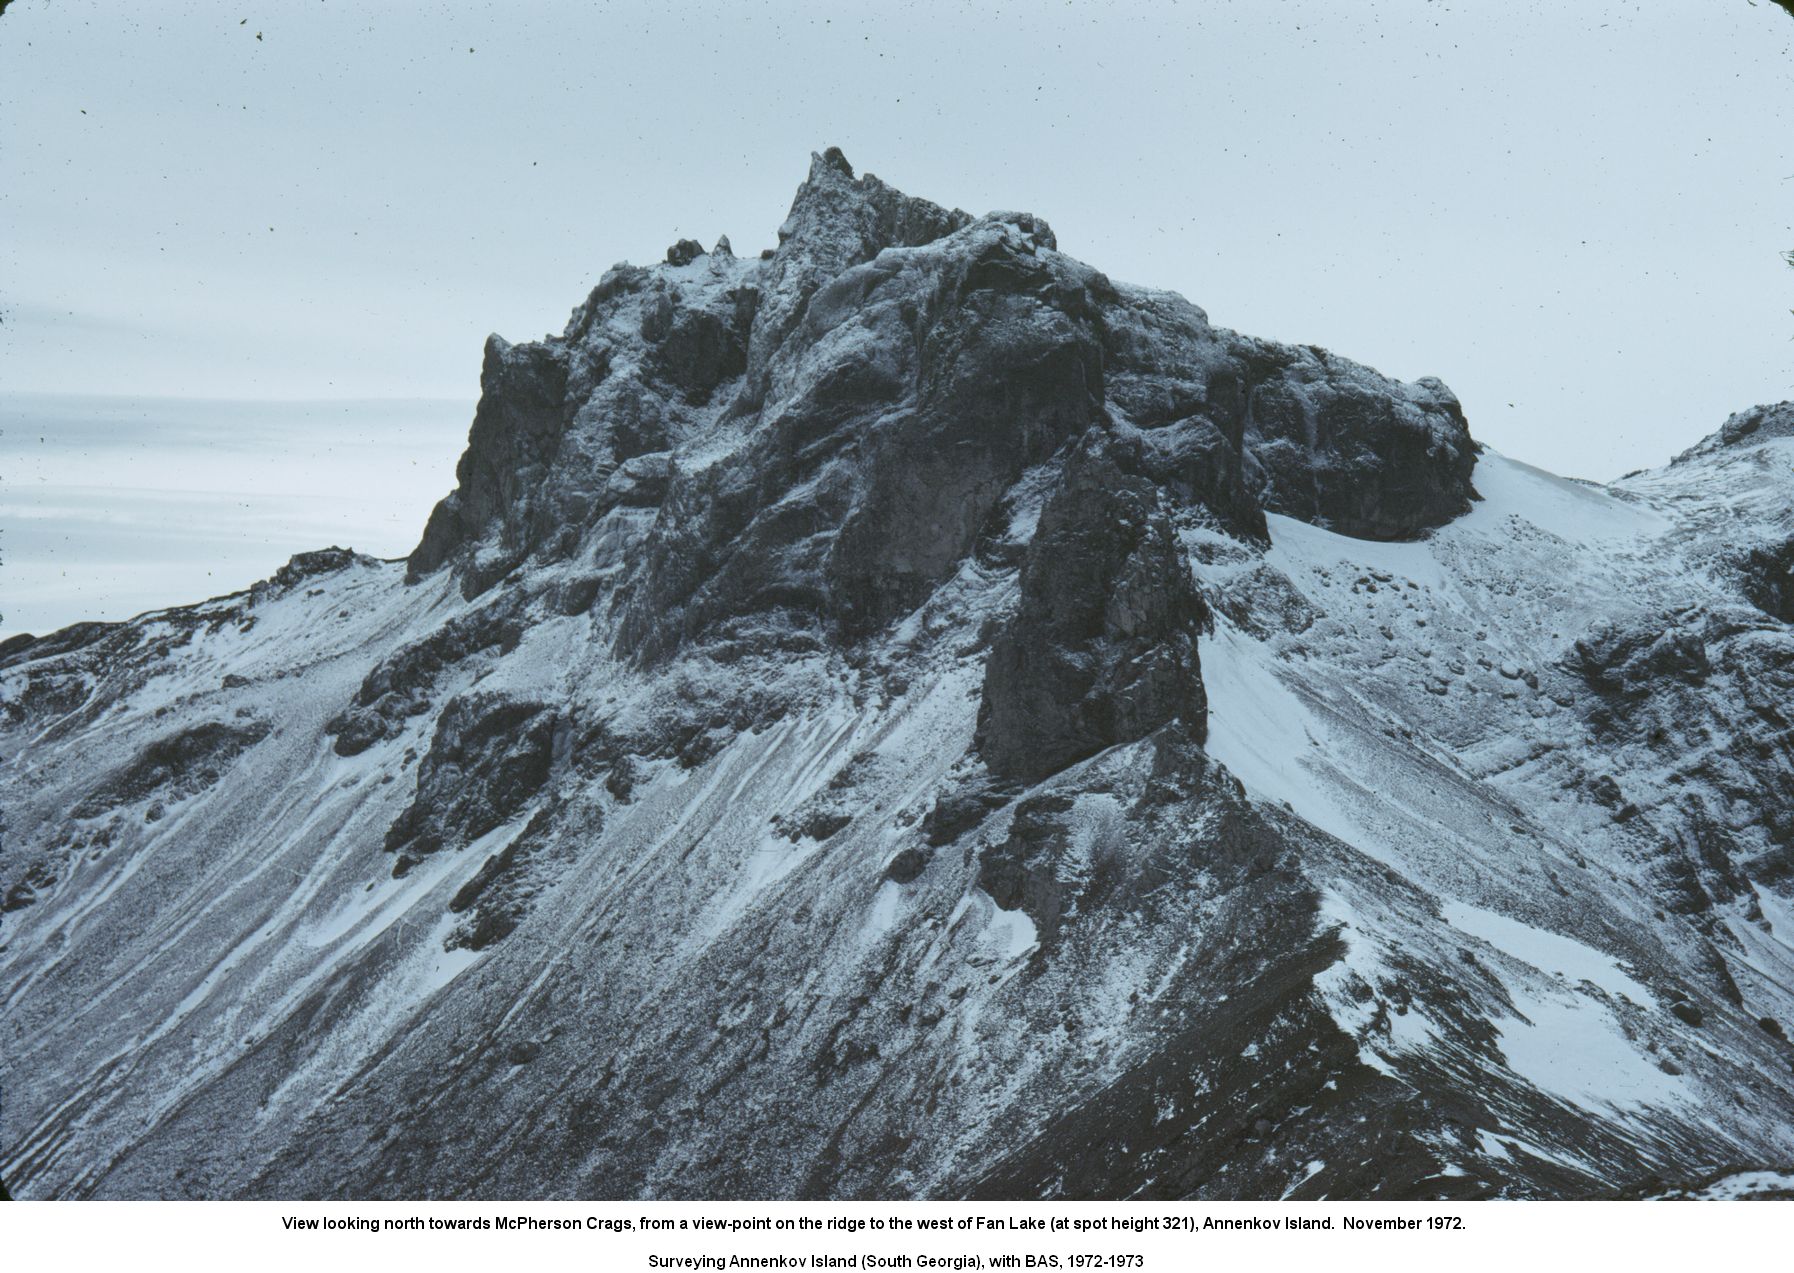 View looking north towards McPherson Crags, from a view-point on the ridge to the west of Fan Lake (at spot height 321), Annenkov Island.  November 1972.